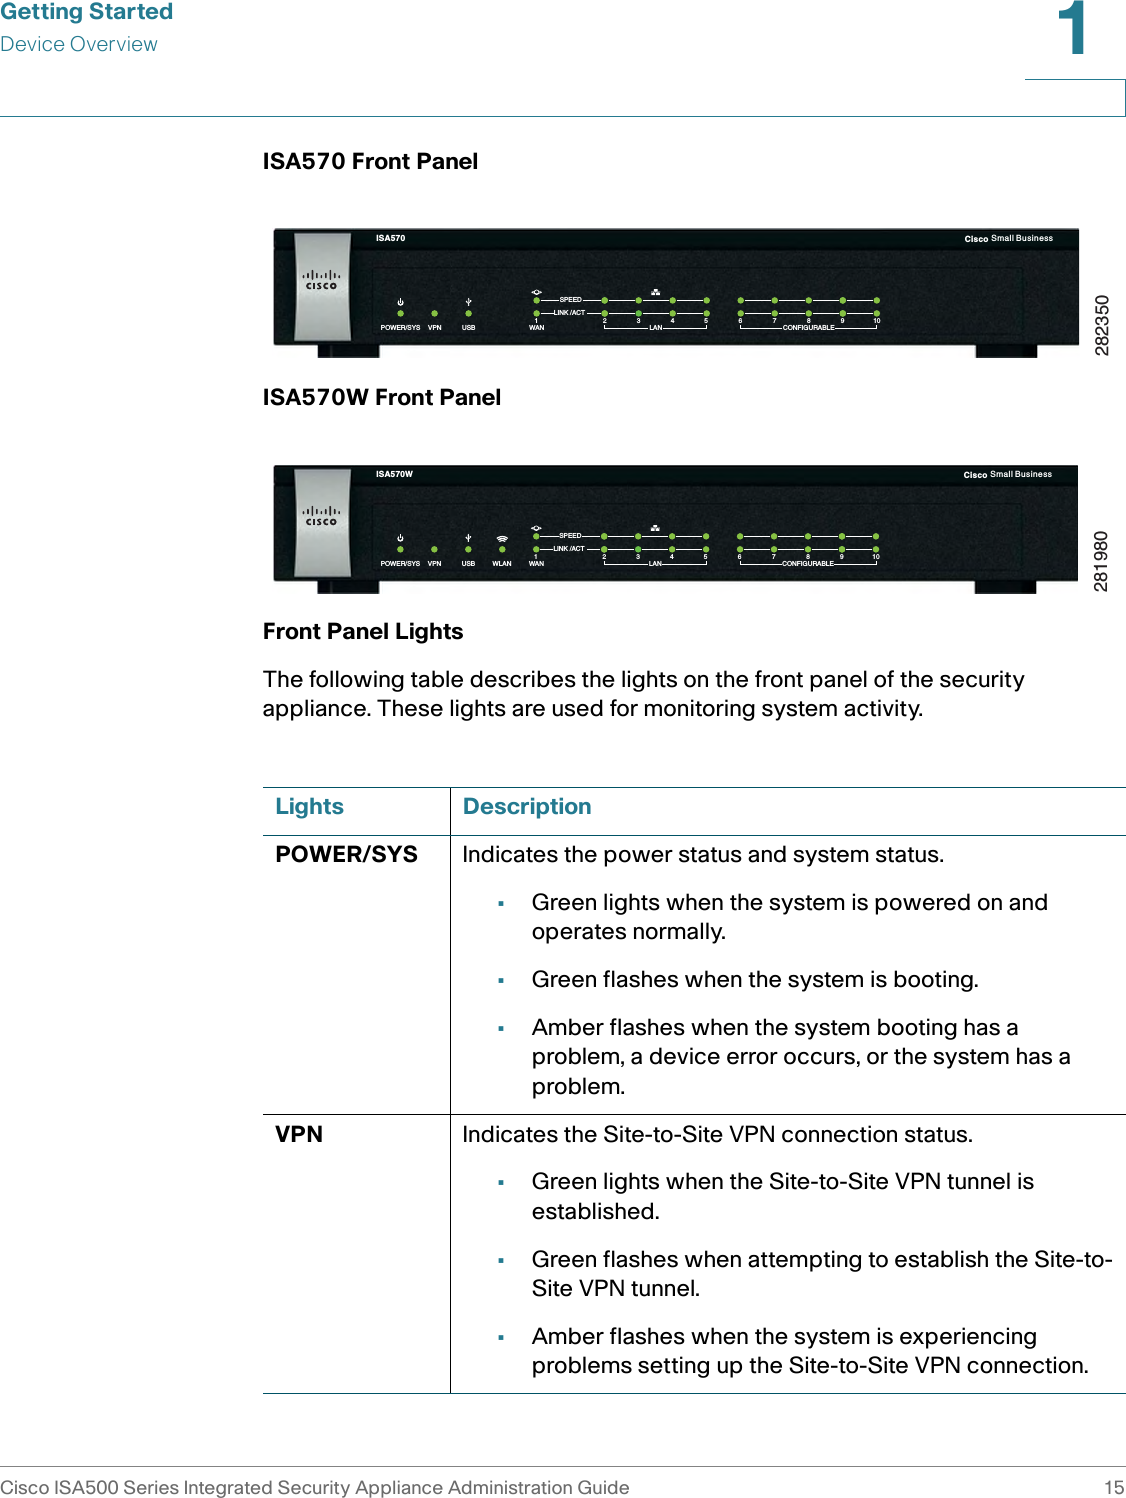 Getting StartedDevice OverviewCisco ISA500 Series Integrated Security Appliance Administration Guide 151 ISA570 Front PanelISA570W Front PanelFront Panel LightsThe following table describes the lights on the front panel of the security appliance. These lights are used for monitoring system activity.Small Business1VPN USB WAN LAN CONFIGURABLEPOWER/SYSSPEEDLINK /ACT9102345678282350ISA570 CiscoSmall Business1VPN USB WAN LAN CONFIGURABLEPOWER/SYSSPEEDLINK /ACT9102345678WLAN281980ISA570W CiscoLights DescriptionPOWER/SYS Indicates the power status and system status.•Green lights when the system is powered on and operates normally. •Green flashes when the system is booting. •Amber flashes when the system booting has a problem, a device error occurs, or the system has a problem.VPN Indicates the Site-to-Site VPN connection status.•Green lights when the Site-to-Site VPN tunnel is established. •Green flashes when attempting to establish the Site-to-Site VPN tunnel. •Amber flashes when the system is experiencing problems setting up the Site-to-Site VPN connection.